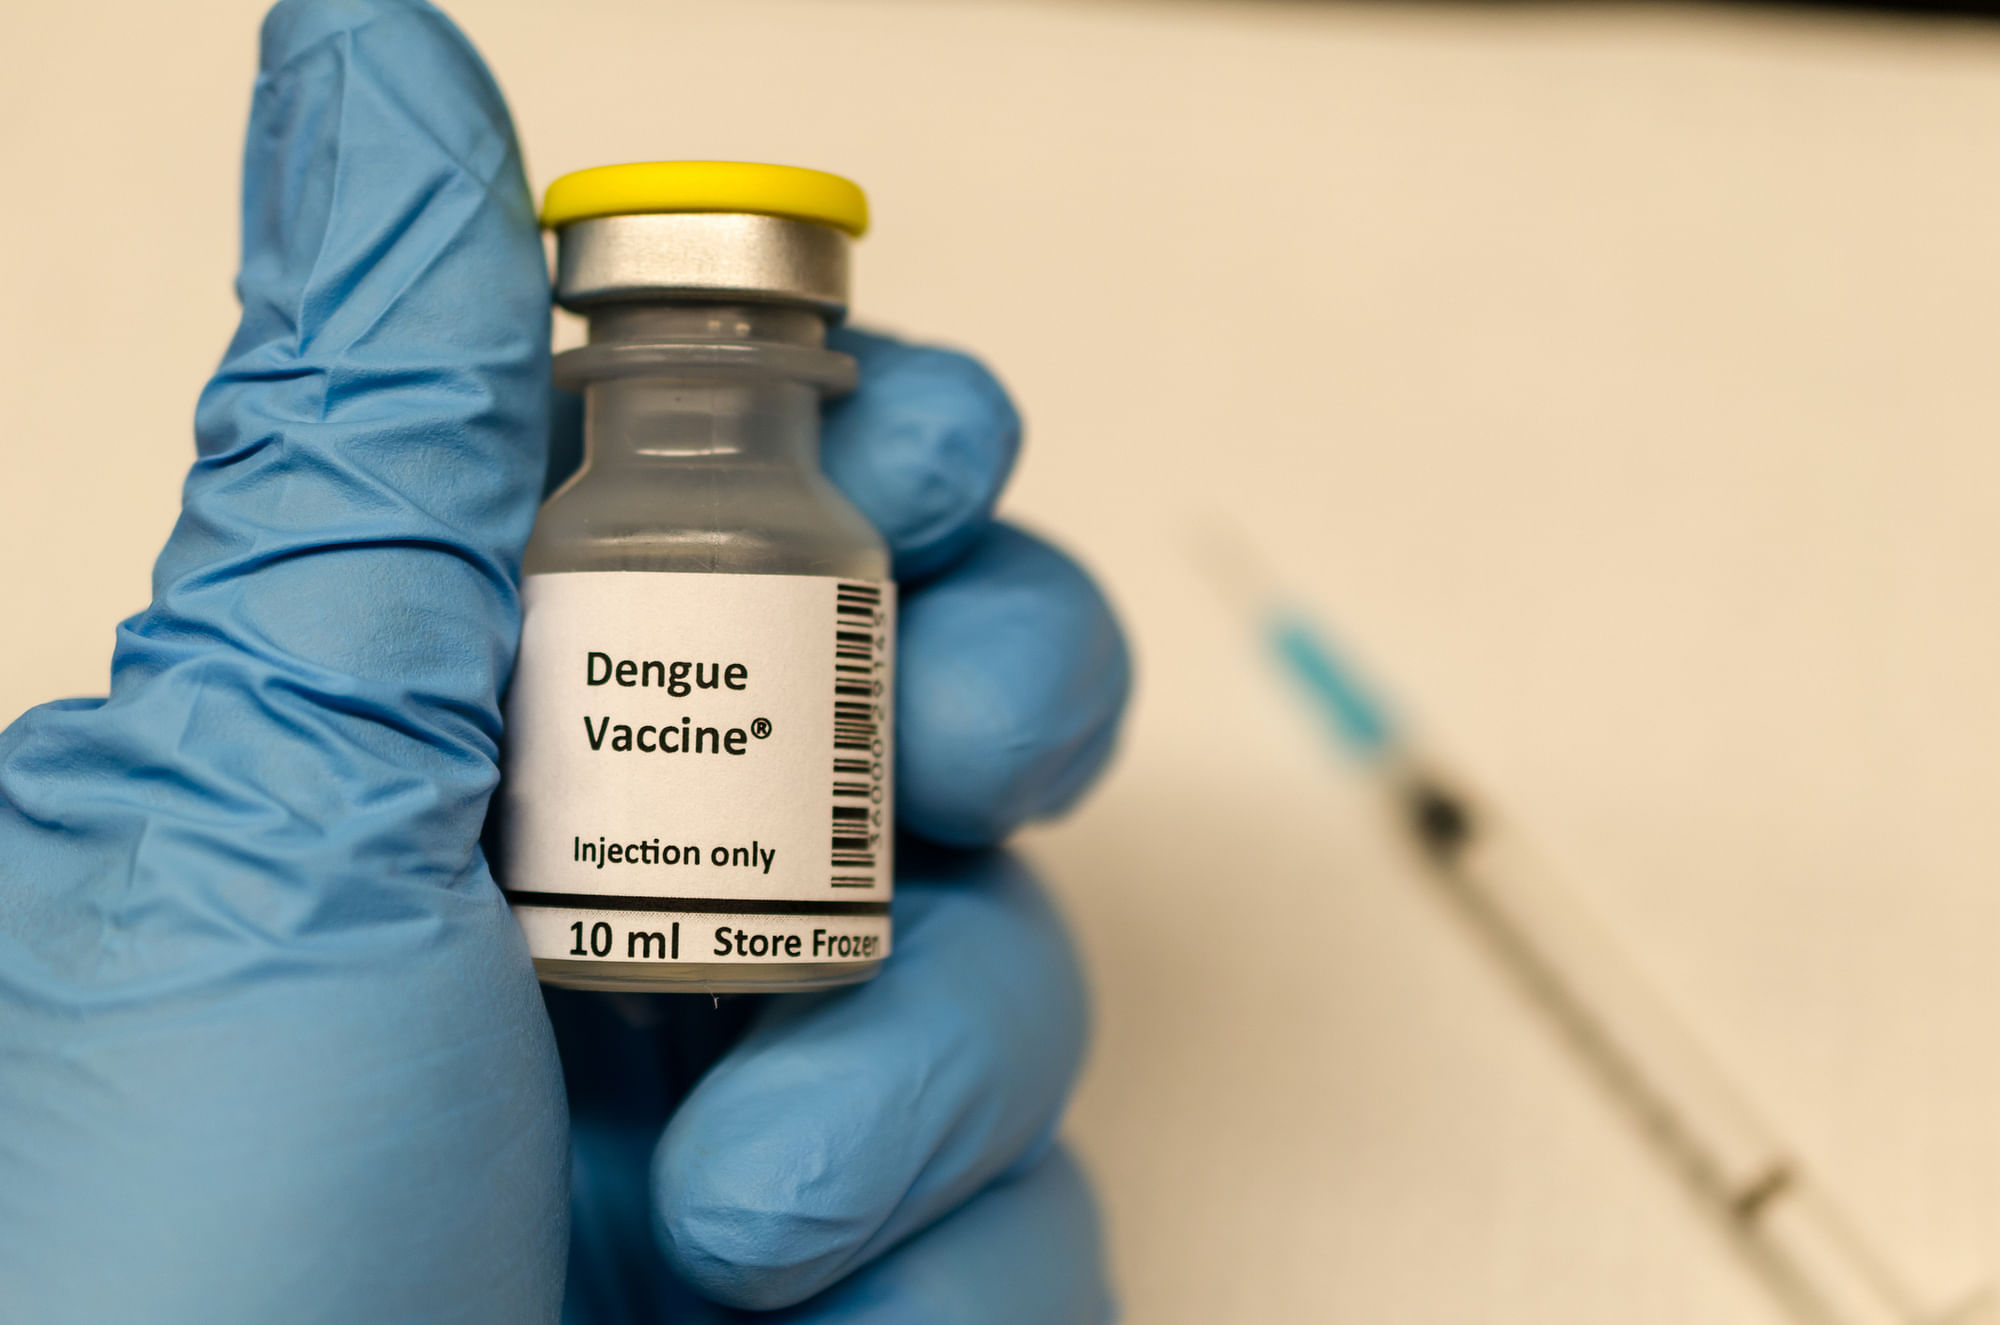 The Food and Drug Administration (FDA) of US has given a restricted approval to Sanofi SA’s dengue vaccine Dengvaxia.